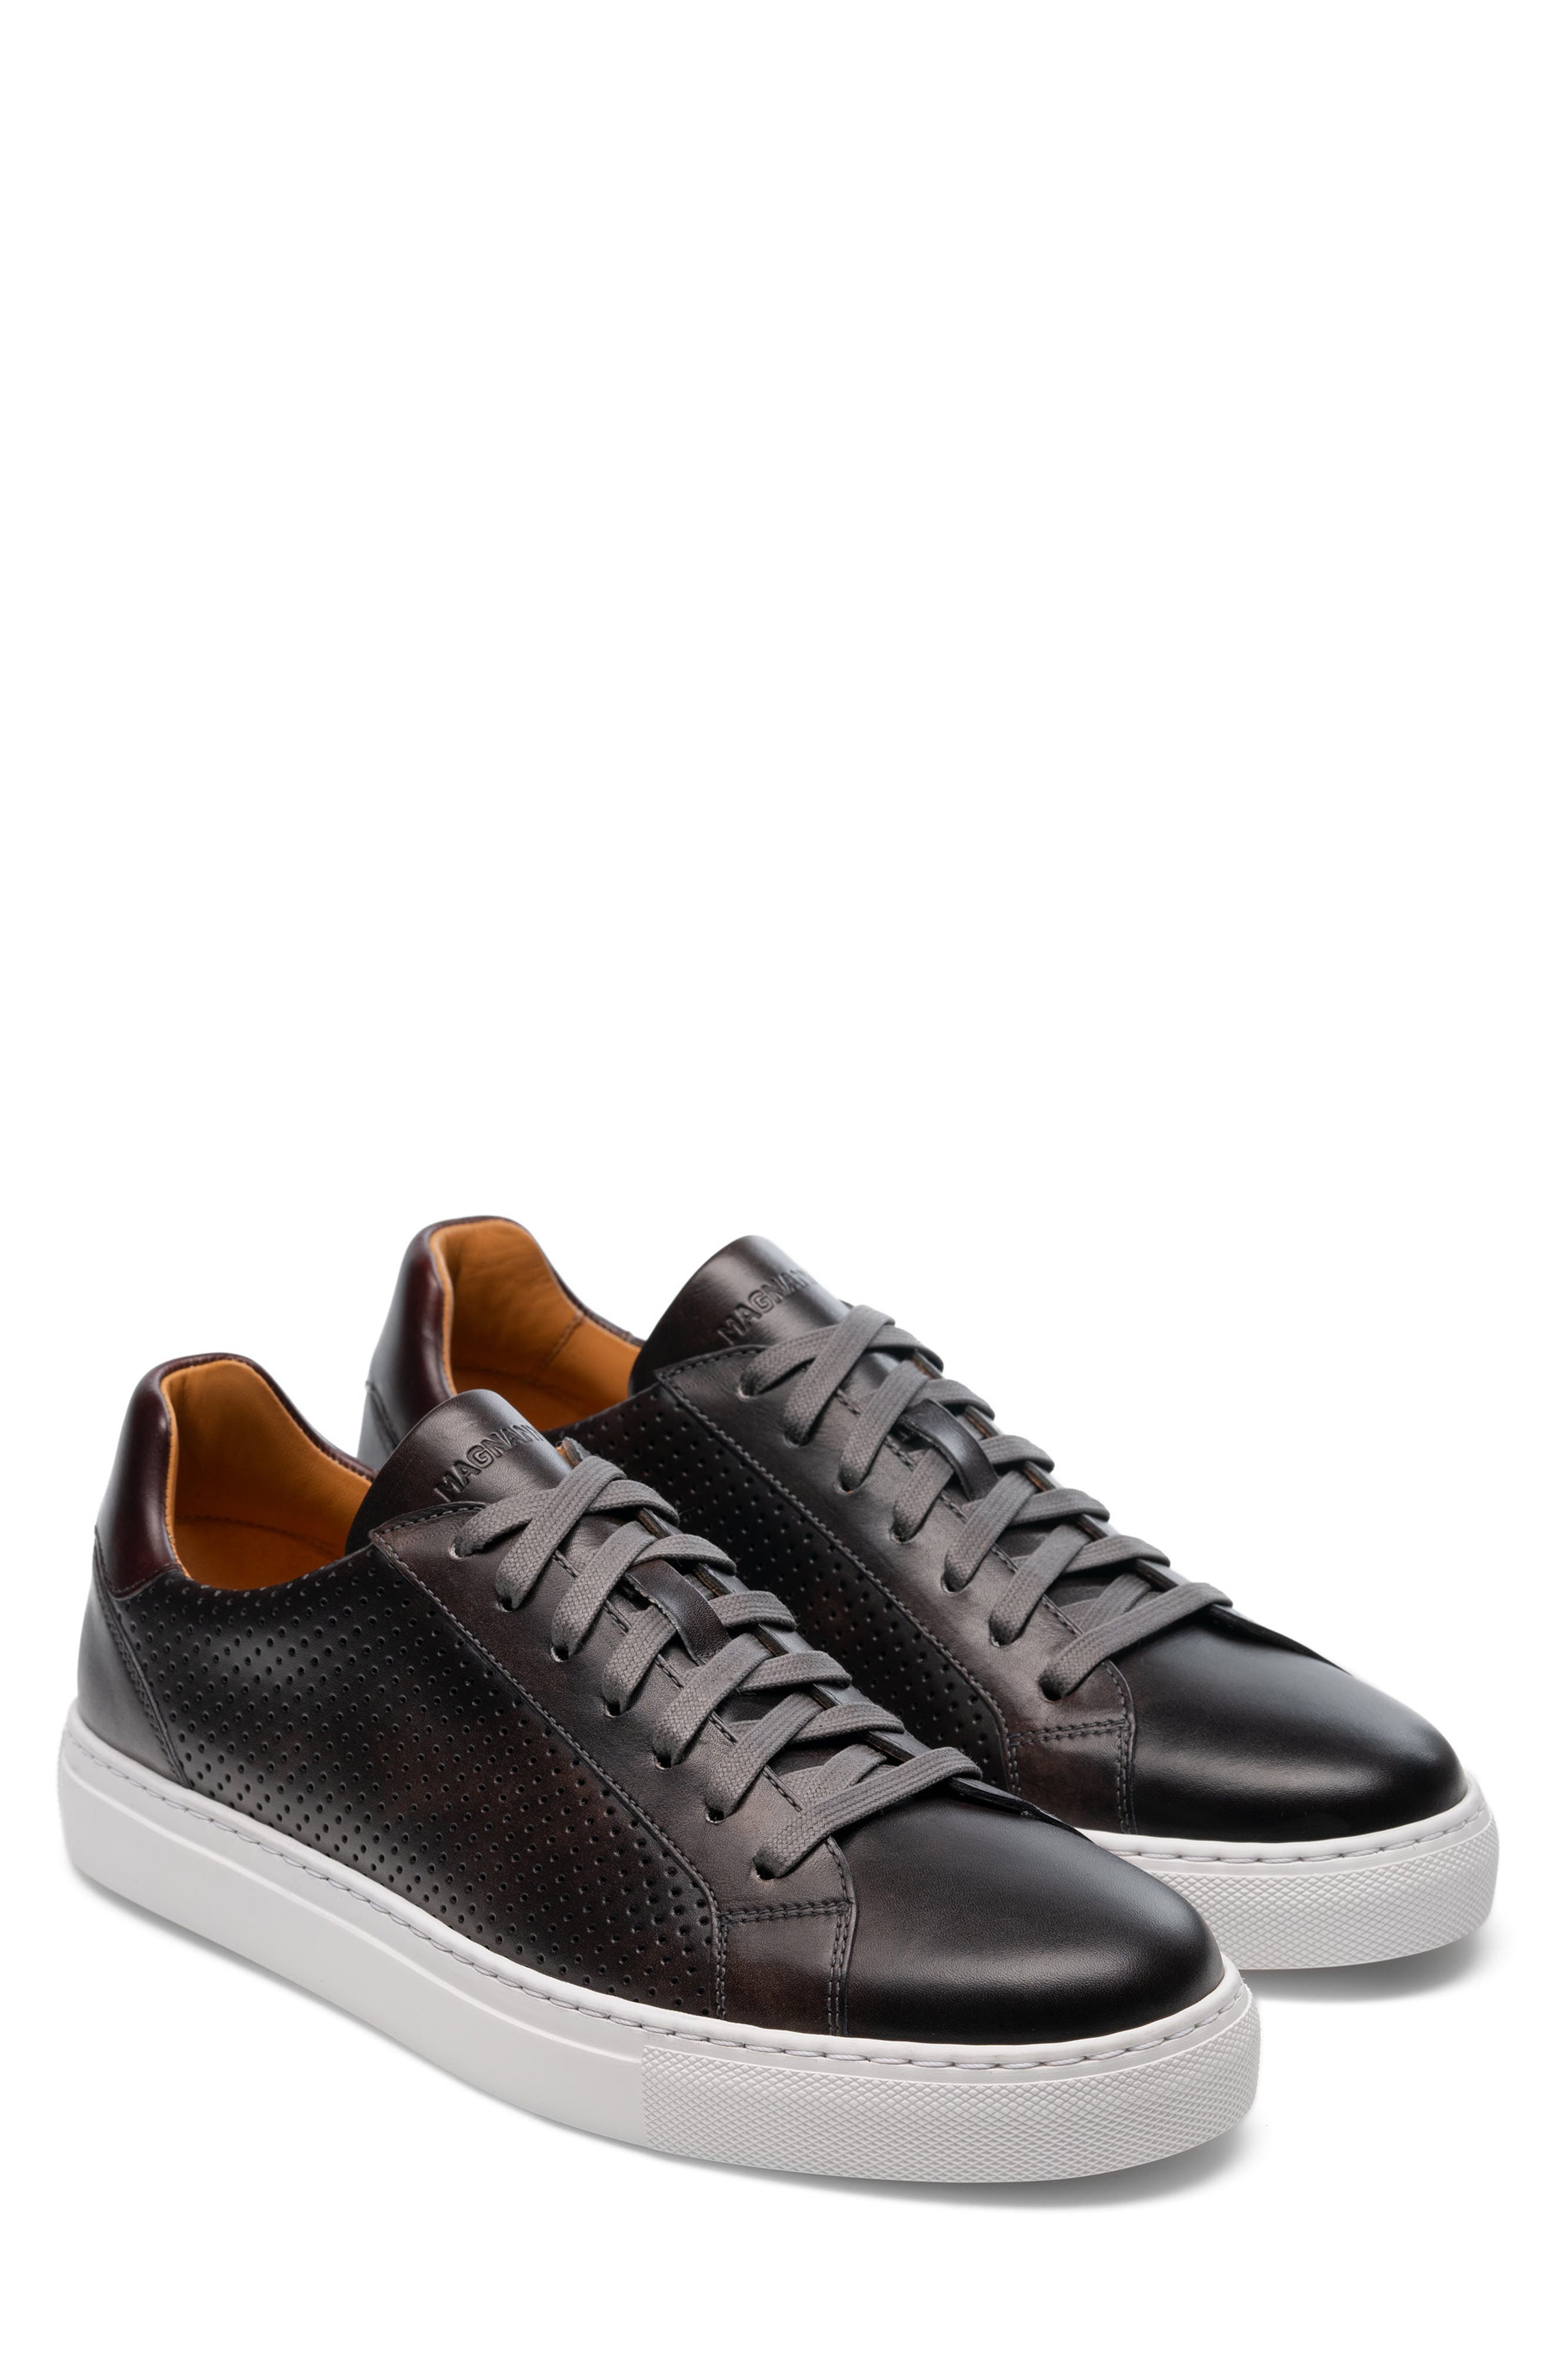 magnanni perforated leather sneakers